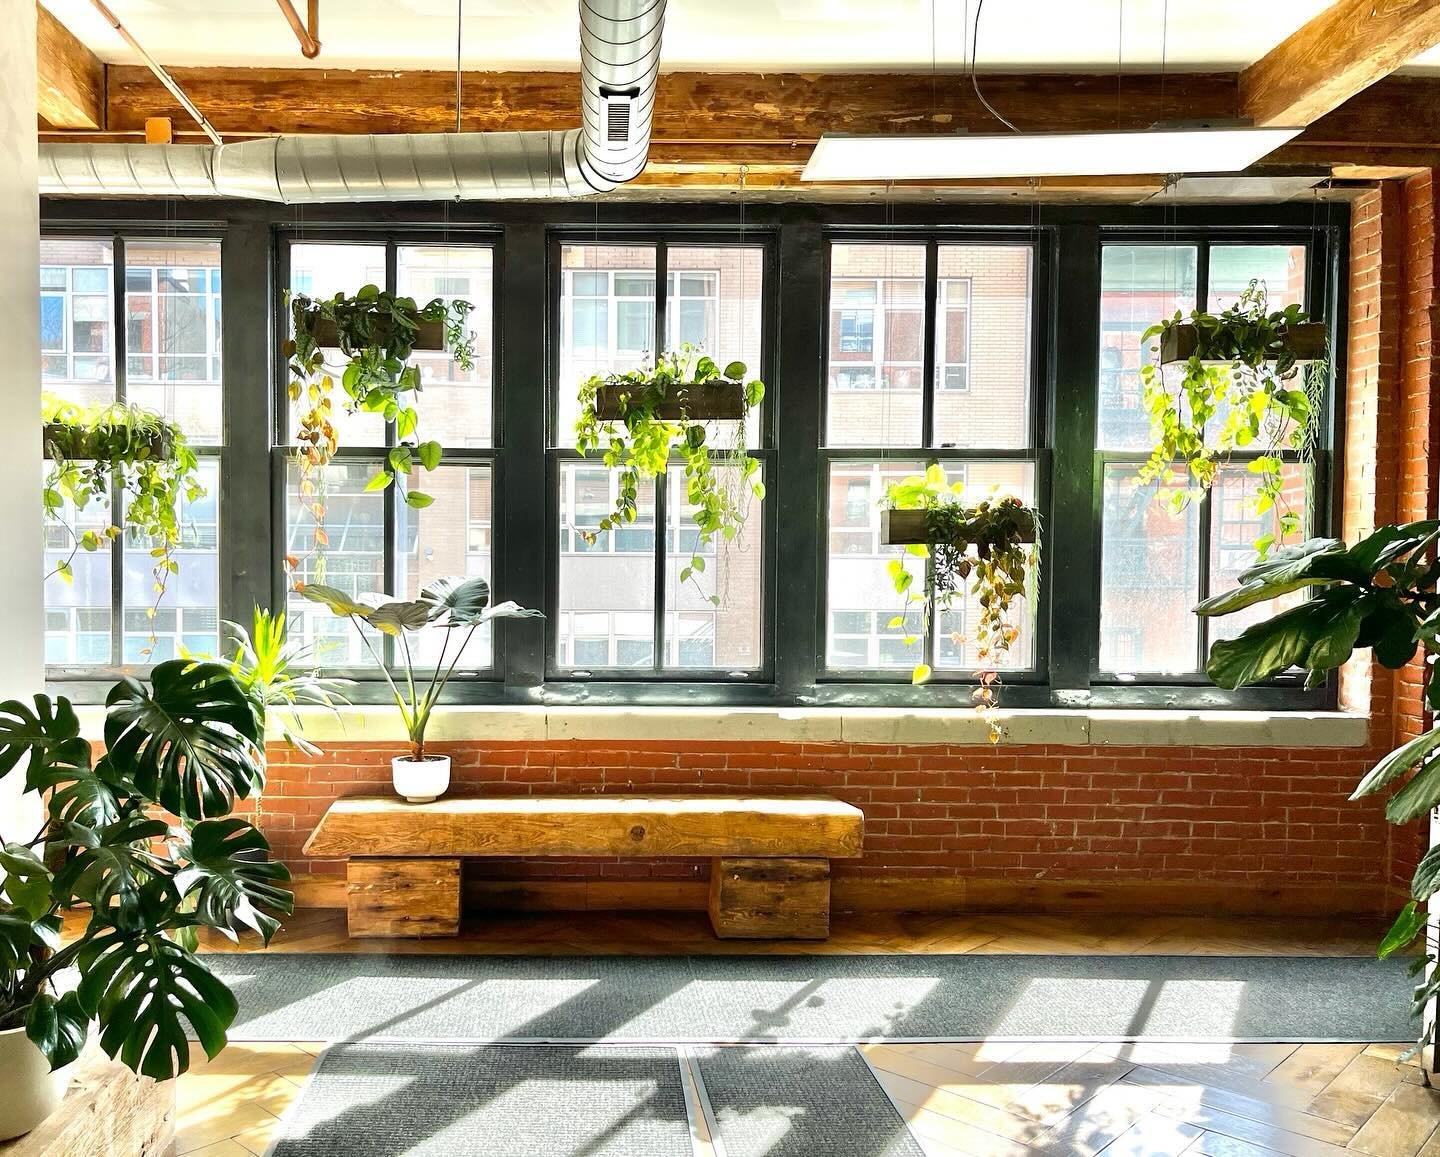 Taking a moment to admire how much these hanging planters have flourished since we first installed them in our client's office entryway last spring! 🌱✨ Sharing some throwback photos from before installation and the initial setup in our stories&mdash